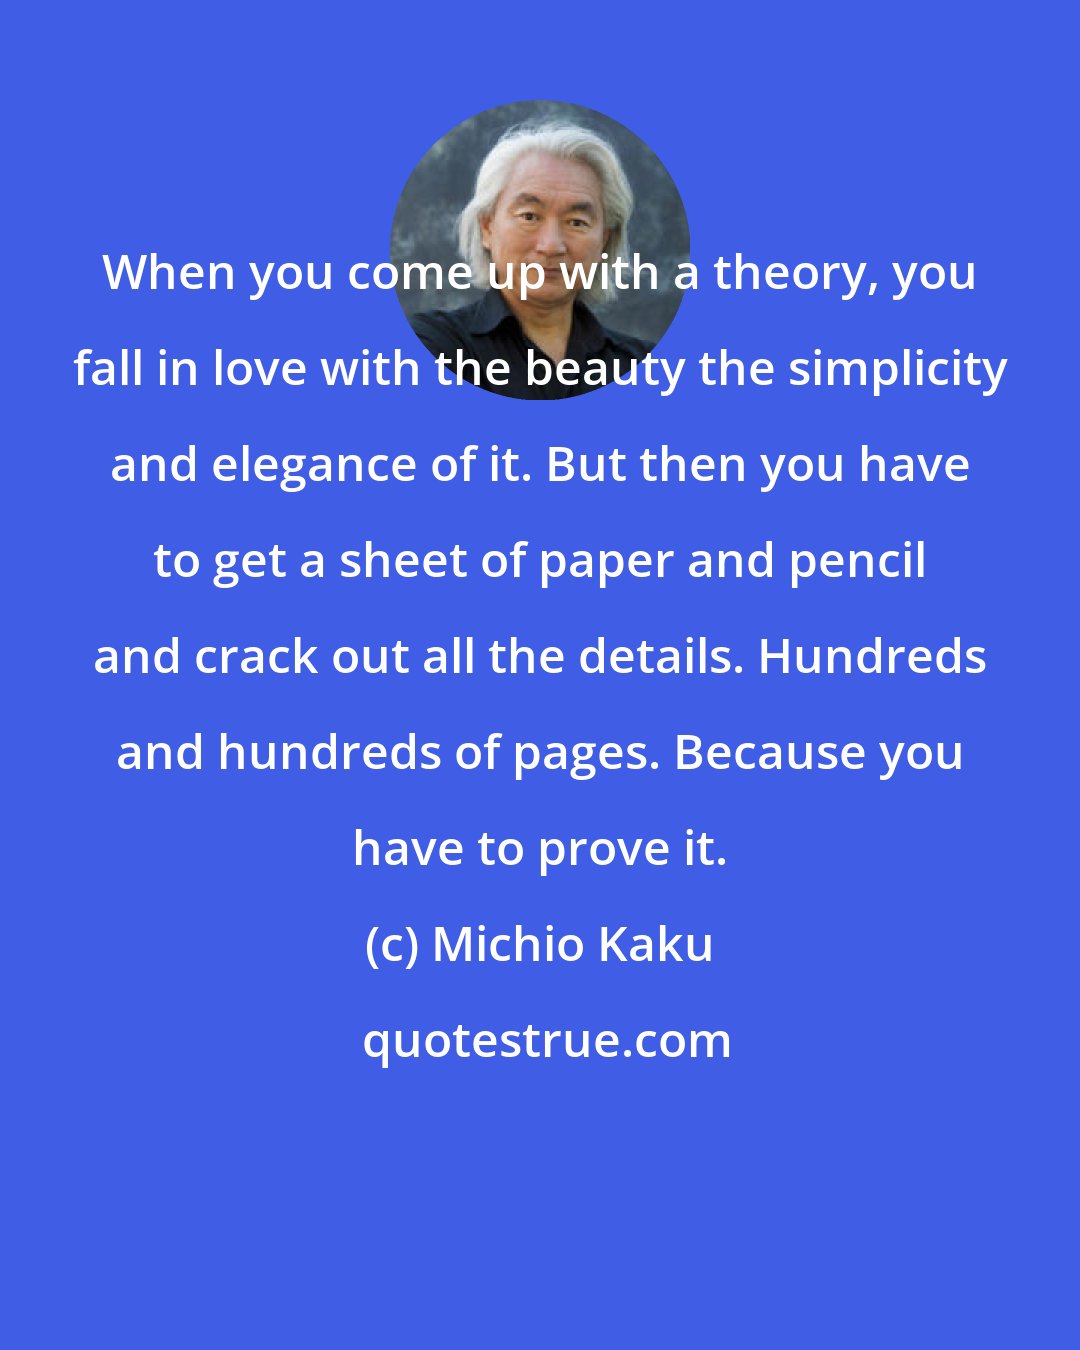 Michio Kaku: When you come up with a theory, you fall in love with the beauty the simplicity and elegance of it. But then you have to get a sheet of paper and pencil and crack out all the details. Hundreds and hundreds of pages. Because you have to prove it.